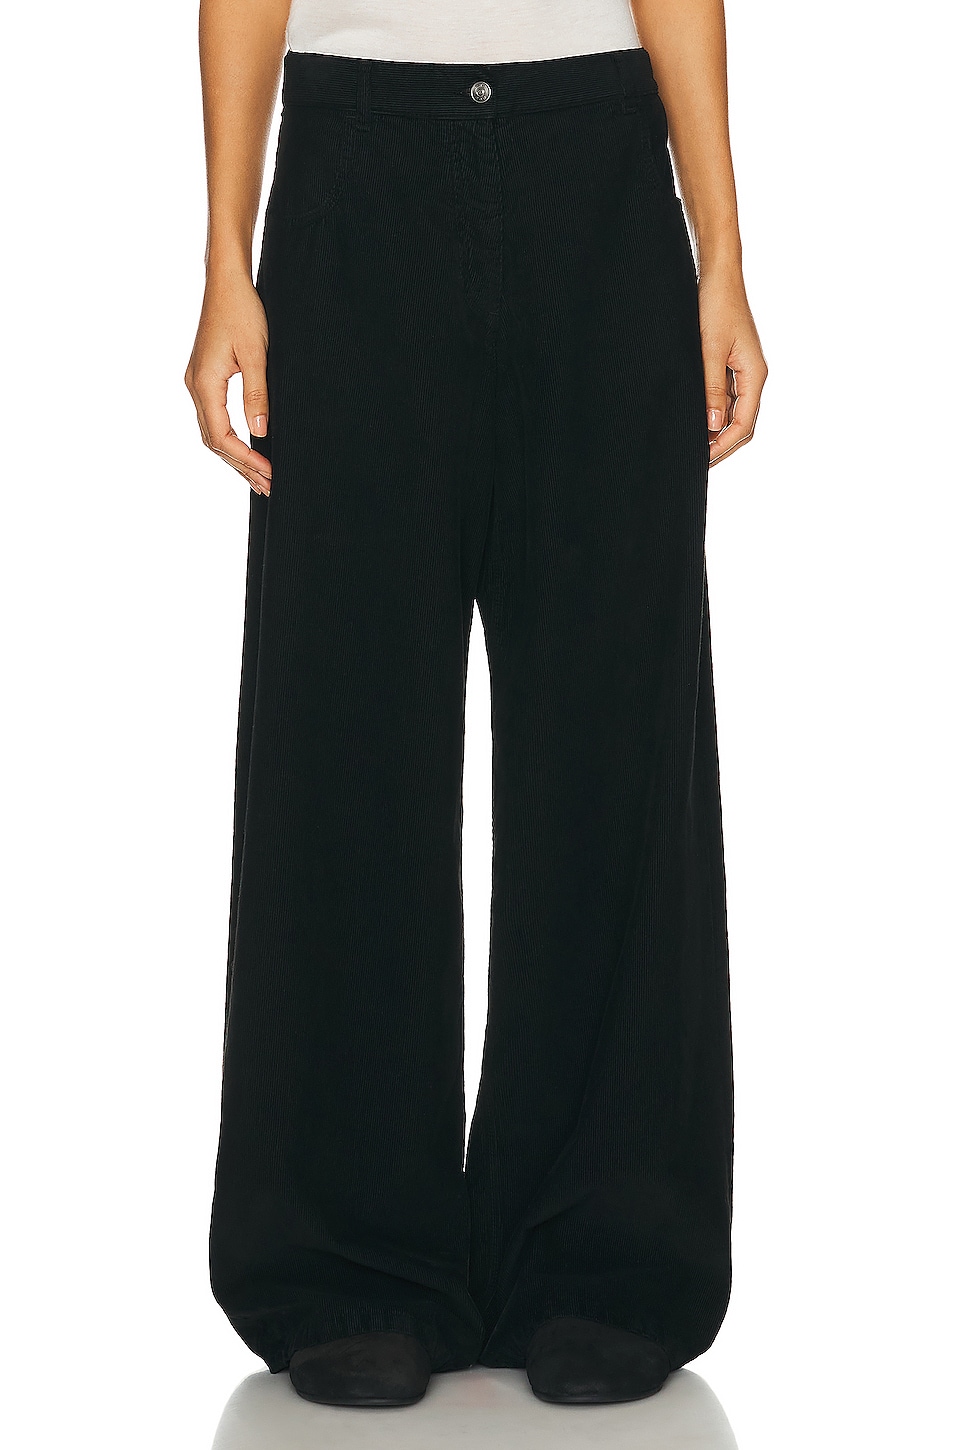 Image 1 of The Row Chan Pant in BLACK